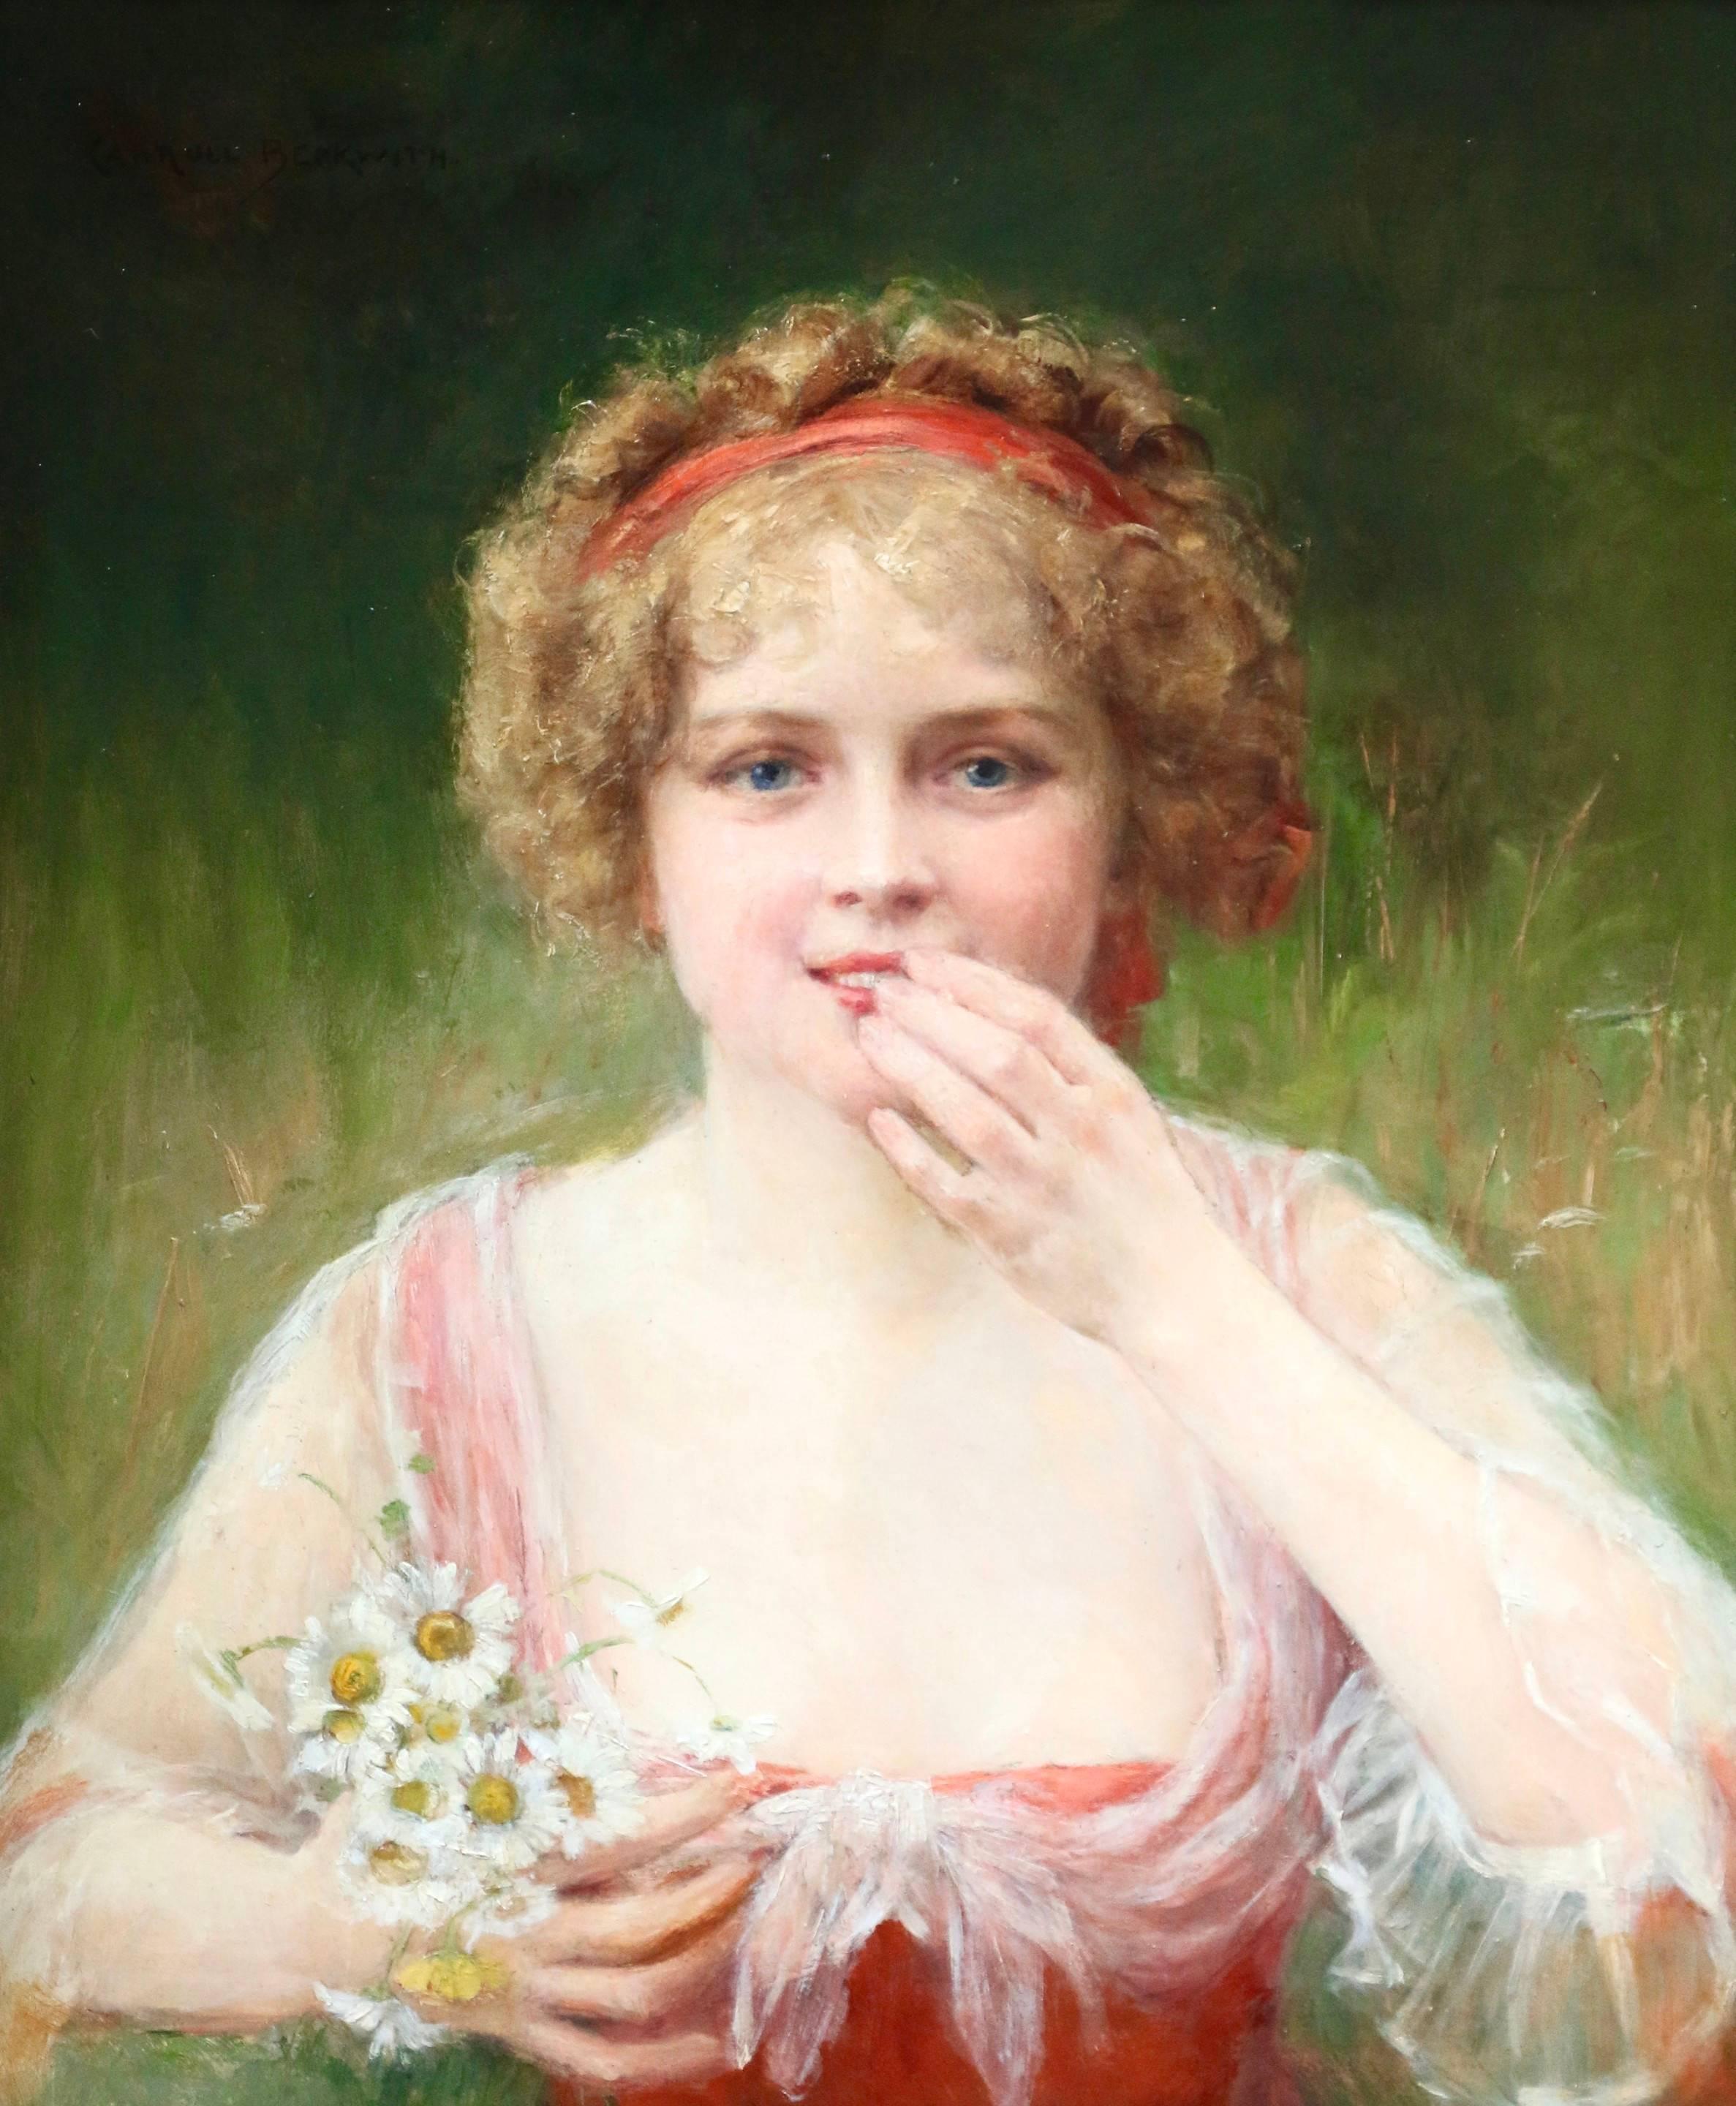 James Carroll Beckwith Figurative Painting - Surprised! - 19th Century Oil, Portrait of Young Girl & Flowers by J C Beckwith